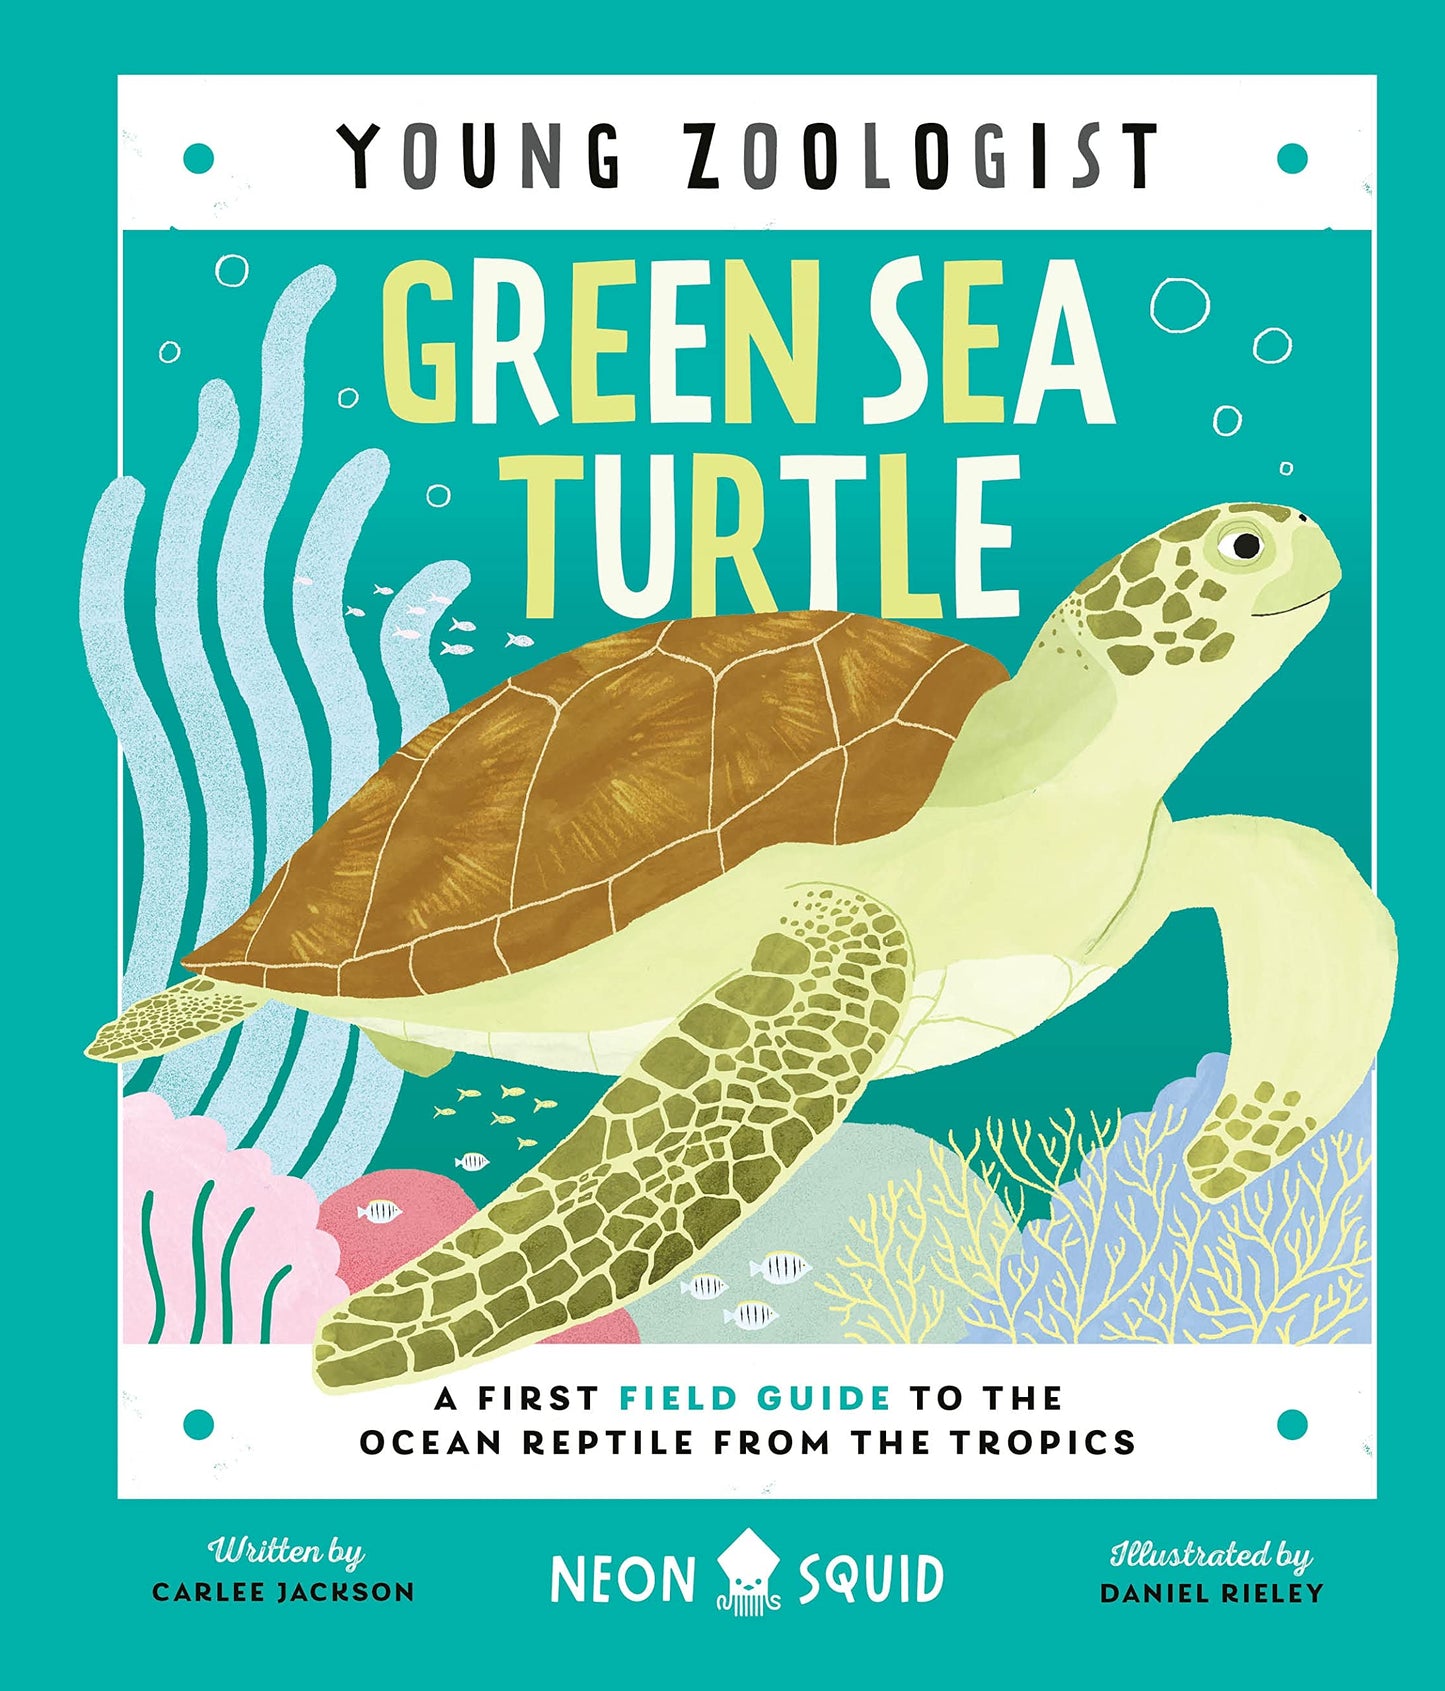 Green Sea Turtle // A First Field Guide to the Ocean Reptile from the Tropics